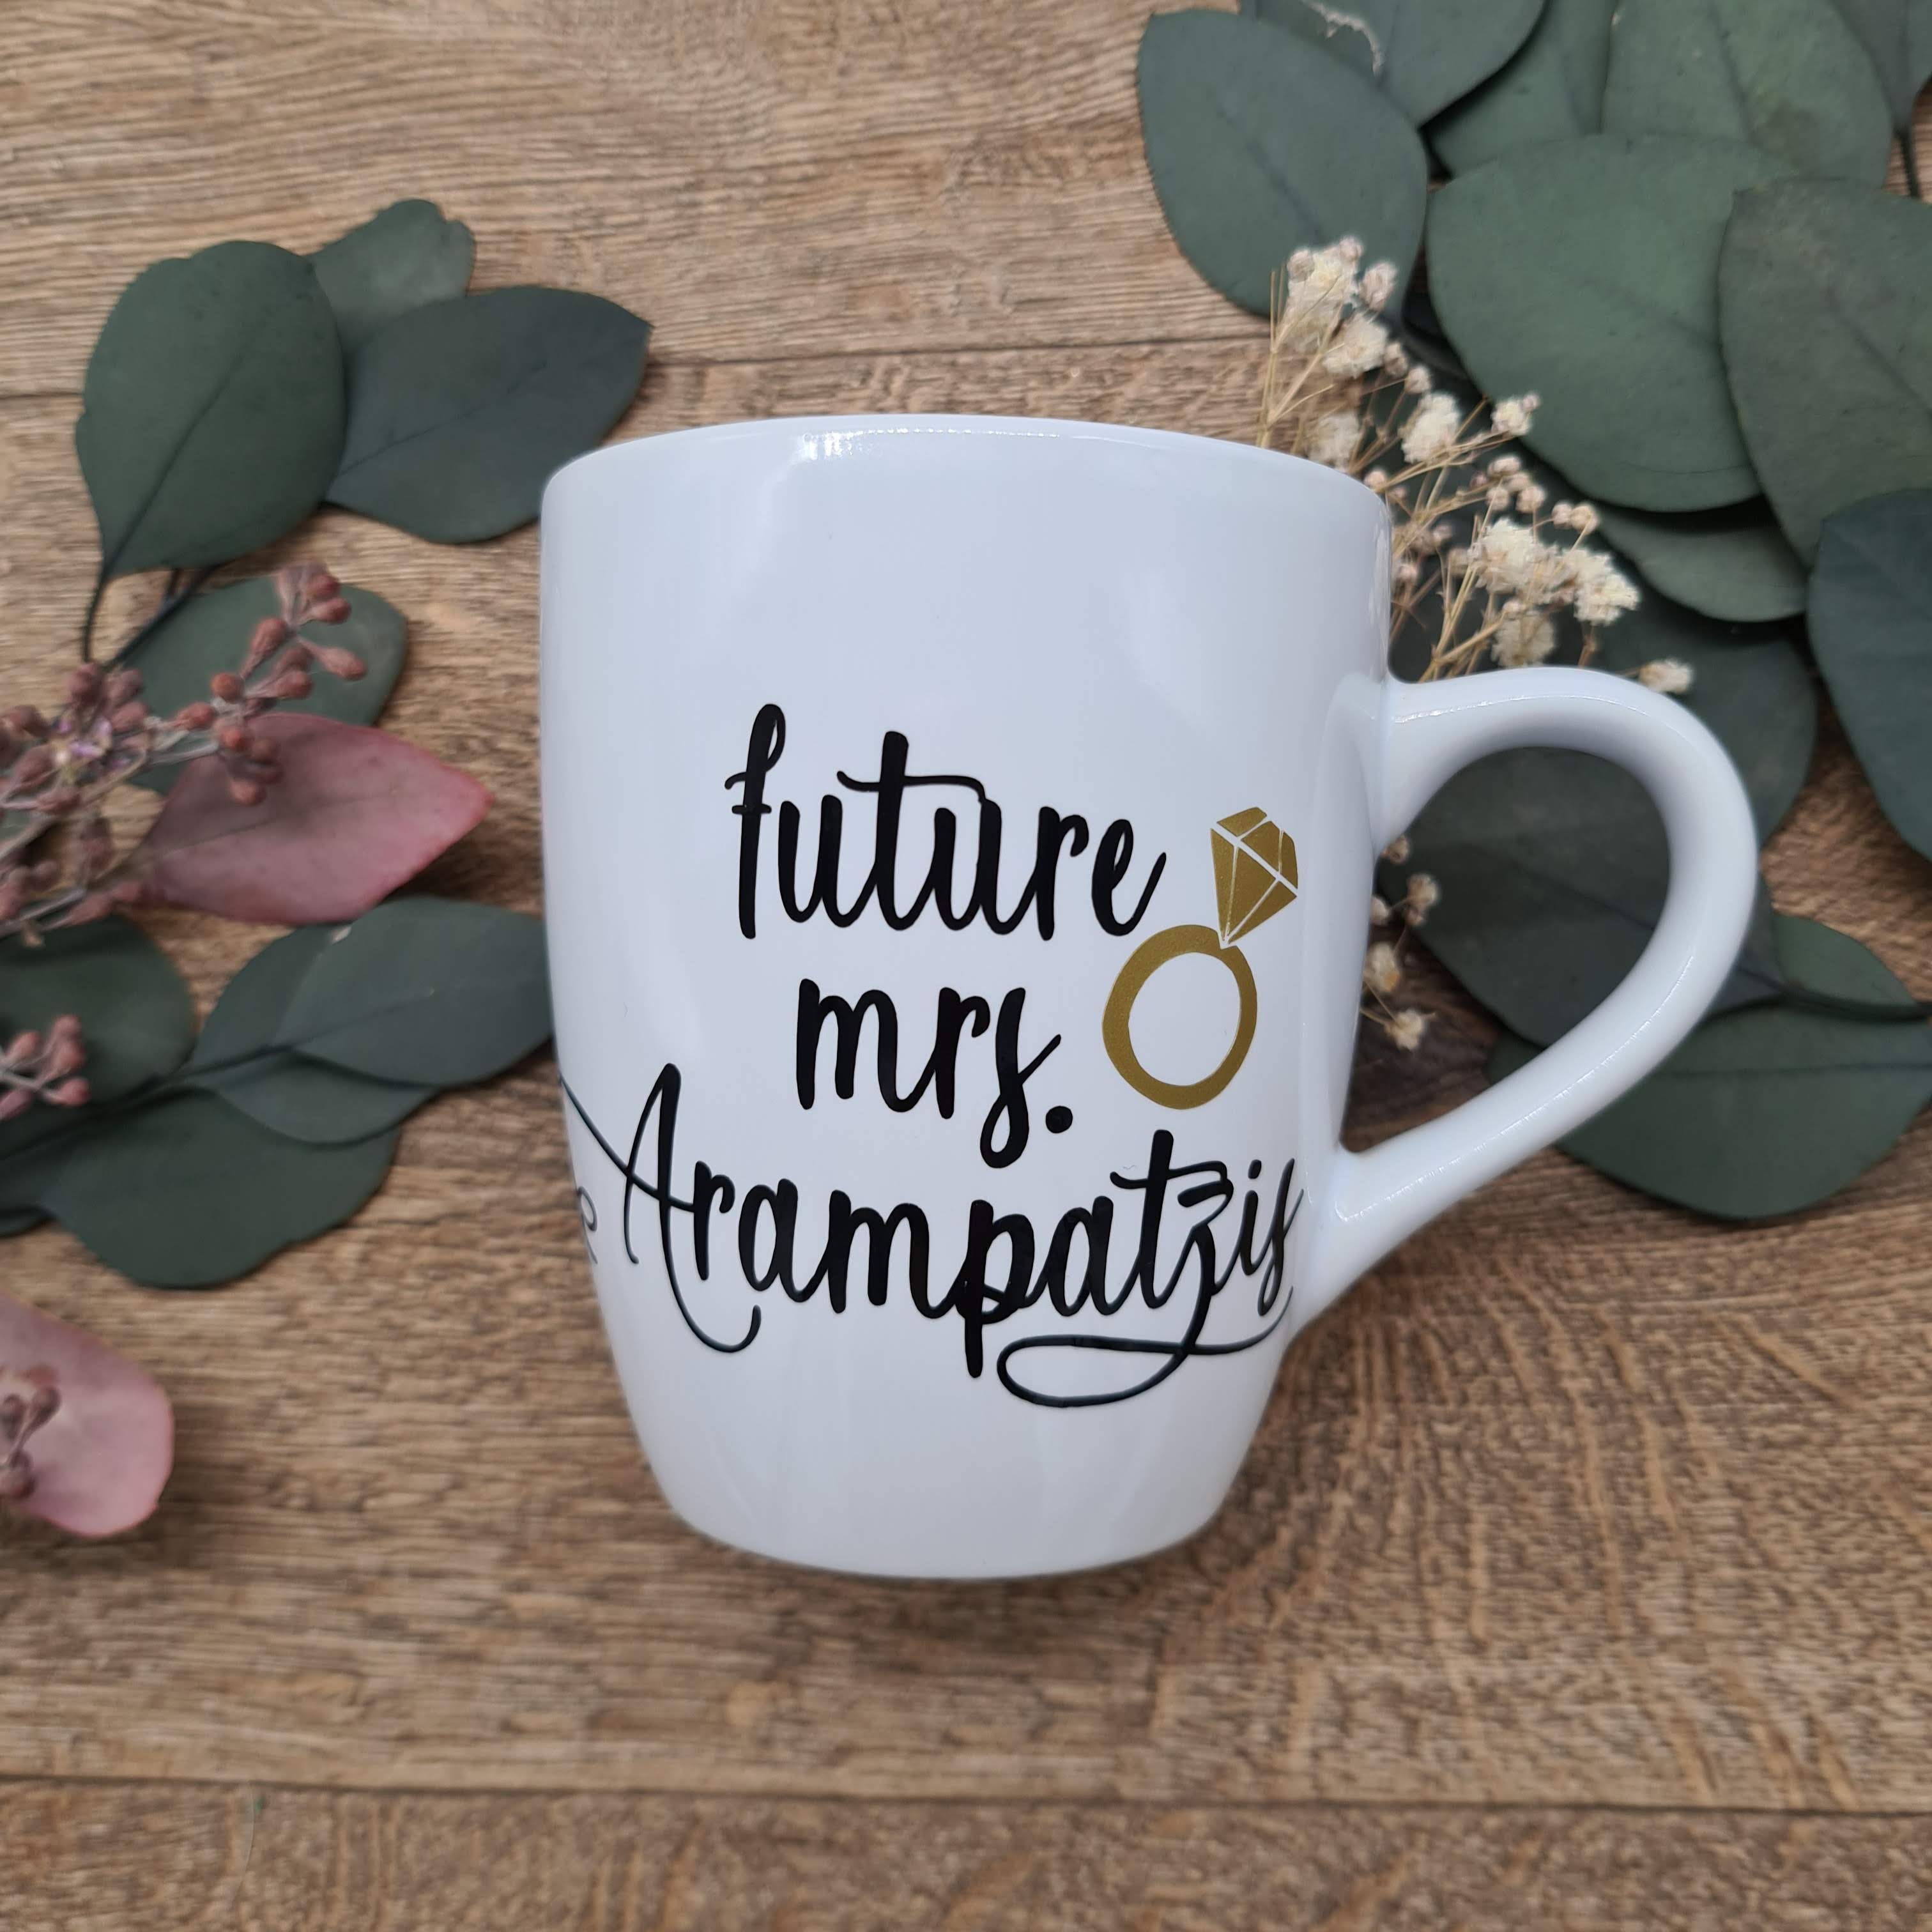 Set with "Future Mrs." and "Future Mr." Engagement, Bride-to-be and Groom Mugs